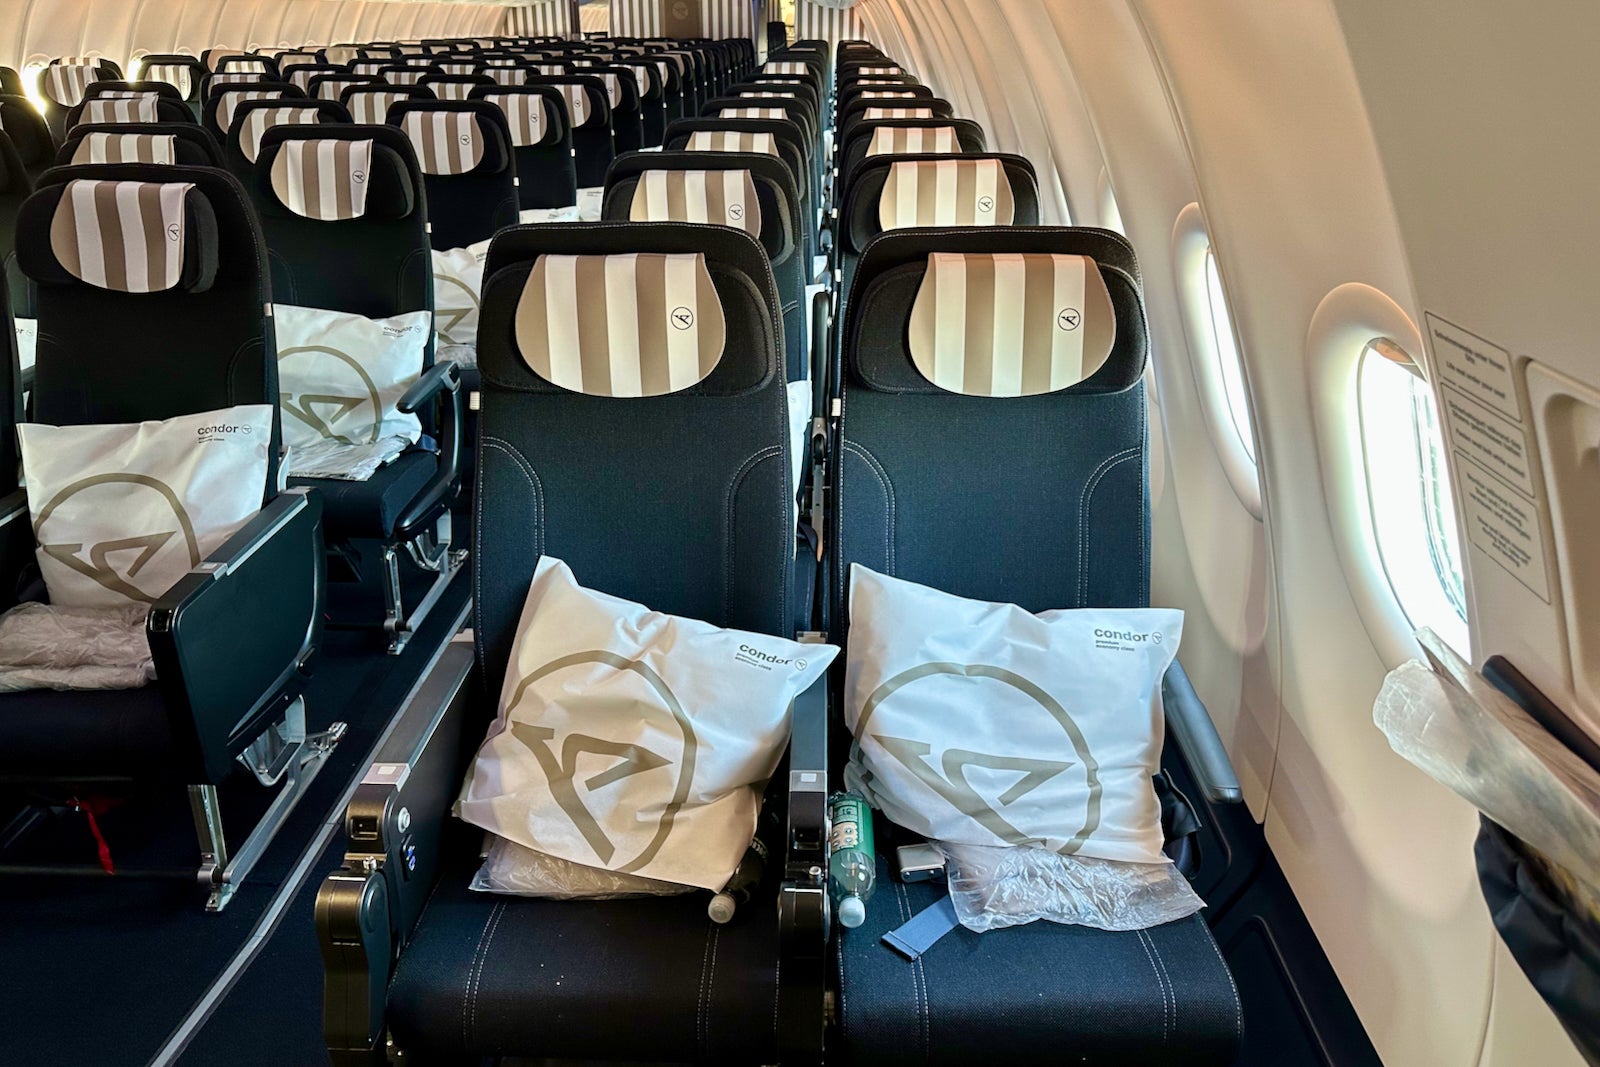 First look: Condor's new Airbus A330 cabins that are much nicer than  Lufthansa's - The Points Guy